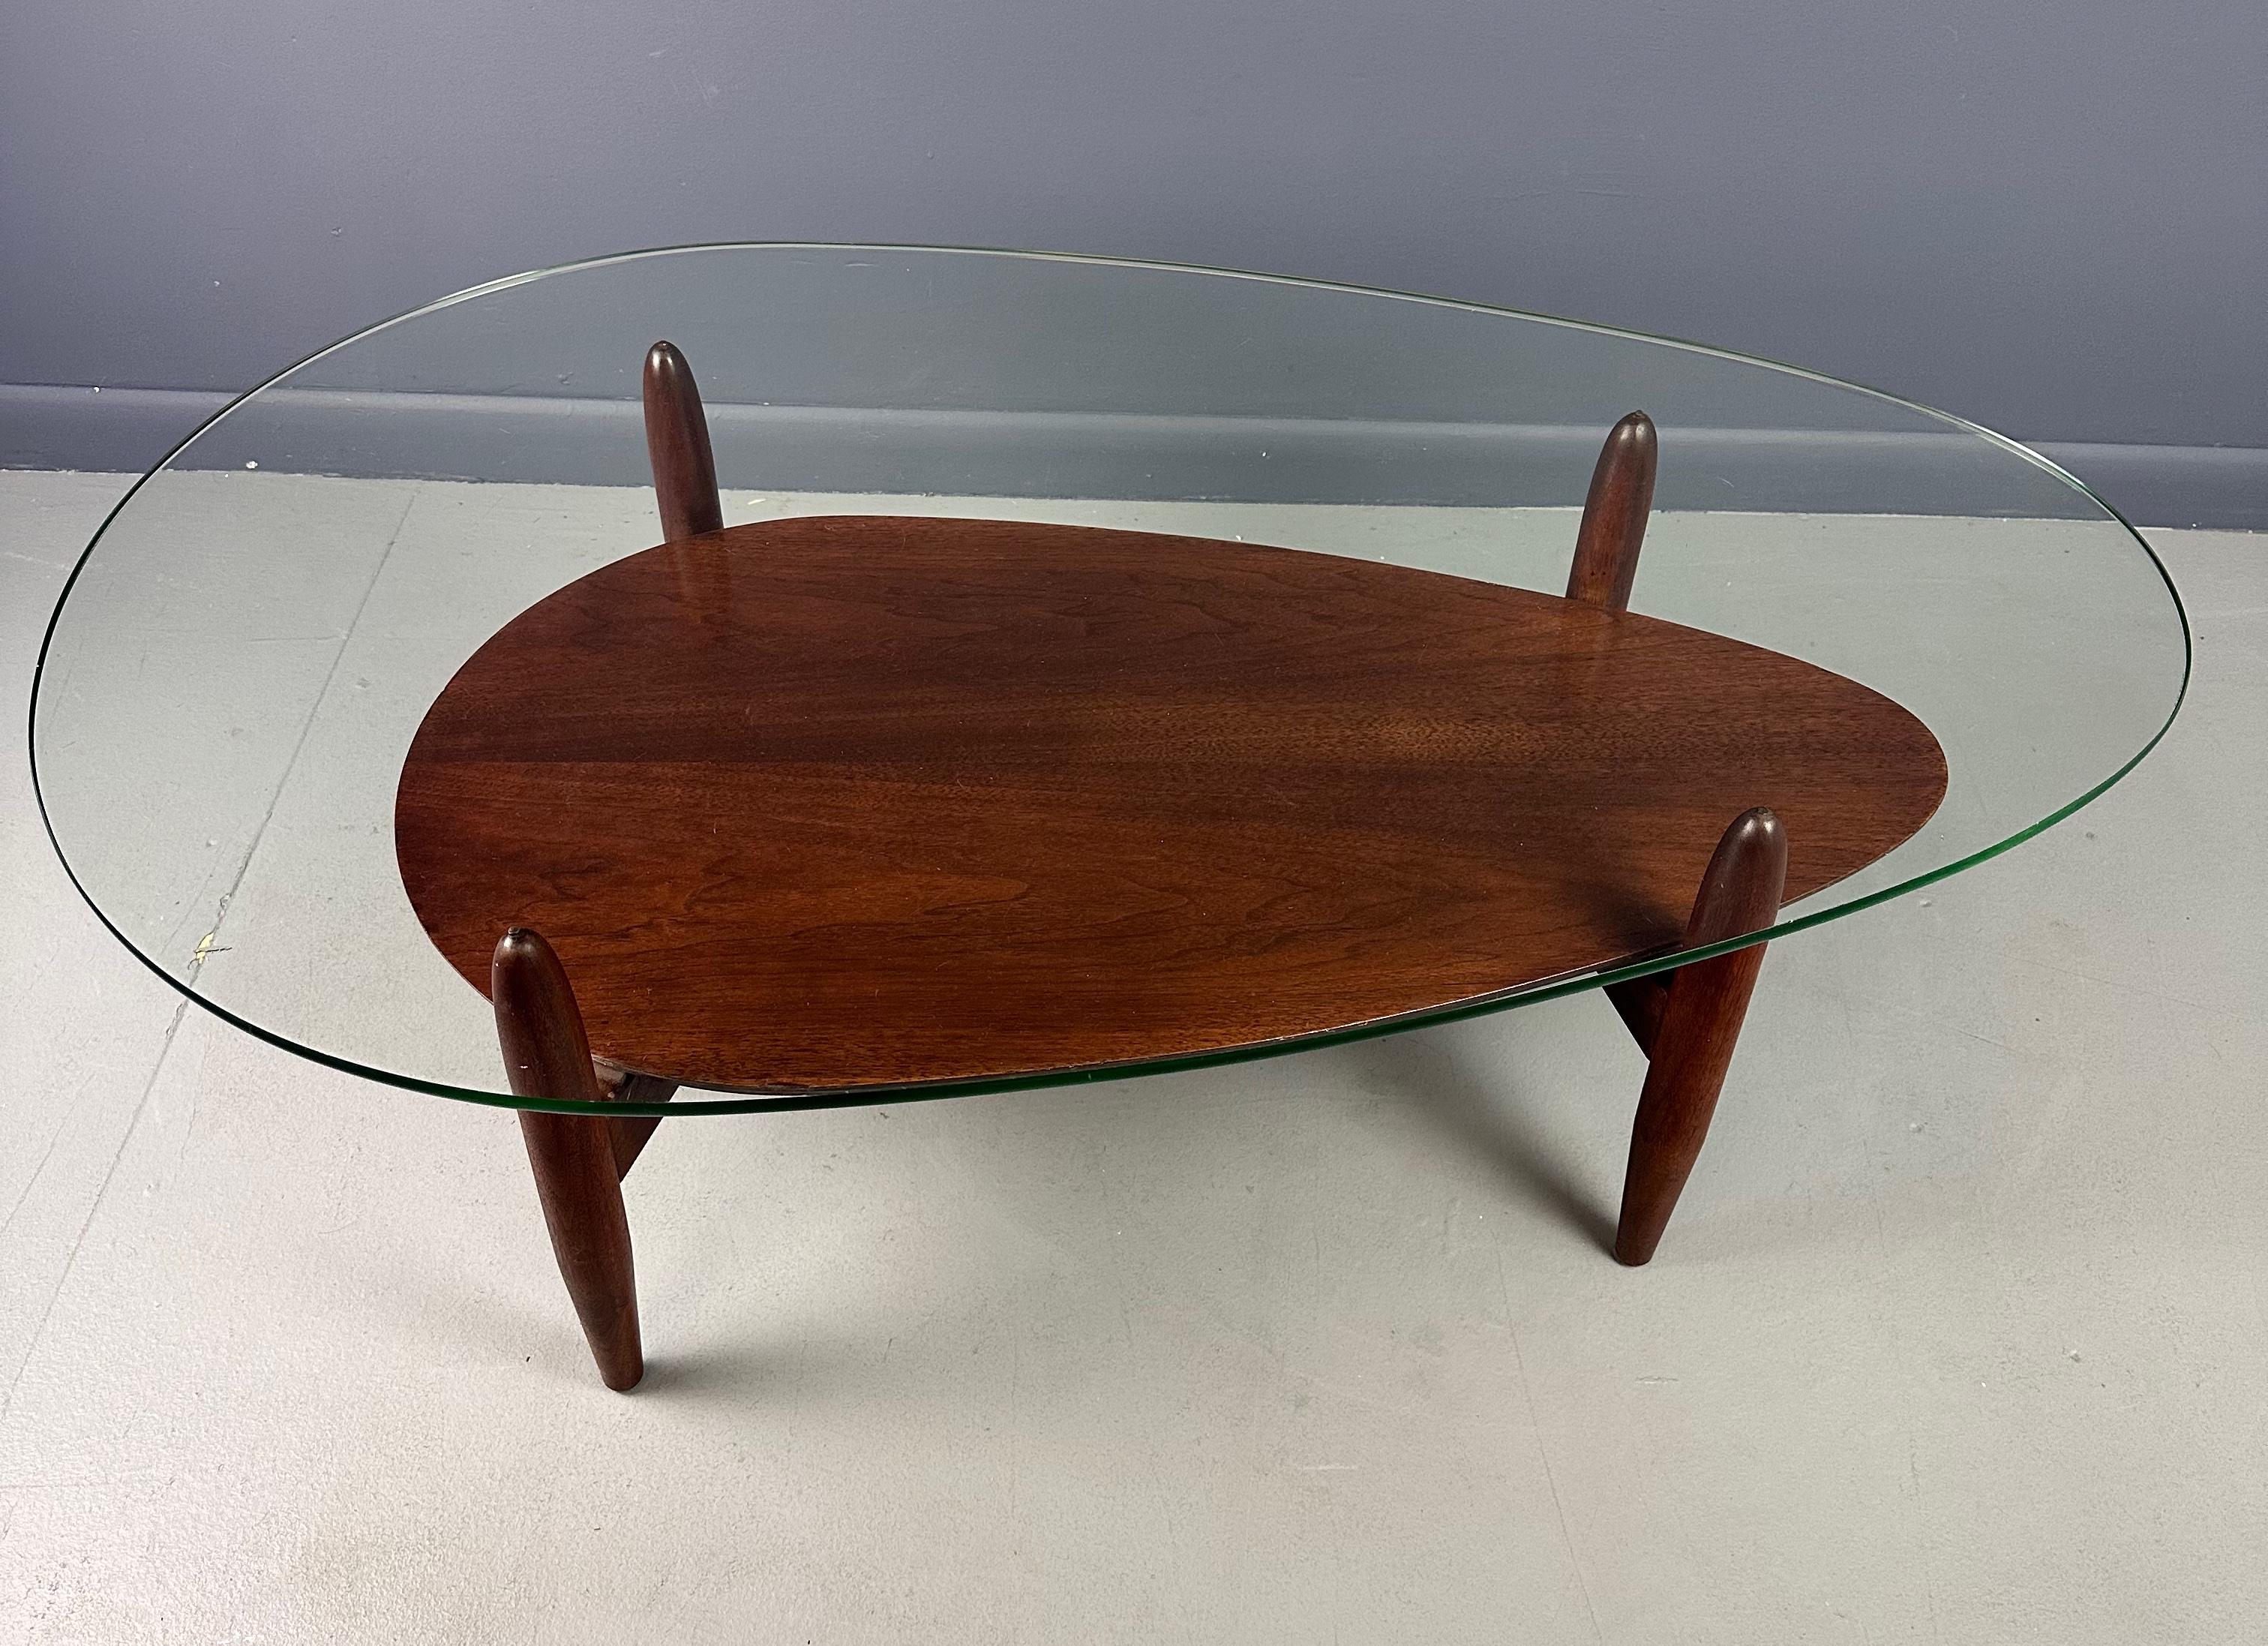 Sculptural Mid Century Teardrop Coffee Table in Walnut by Adrian Pearsall In Good Condition For Sale In Philadelphia, PA